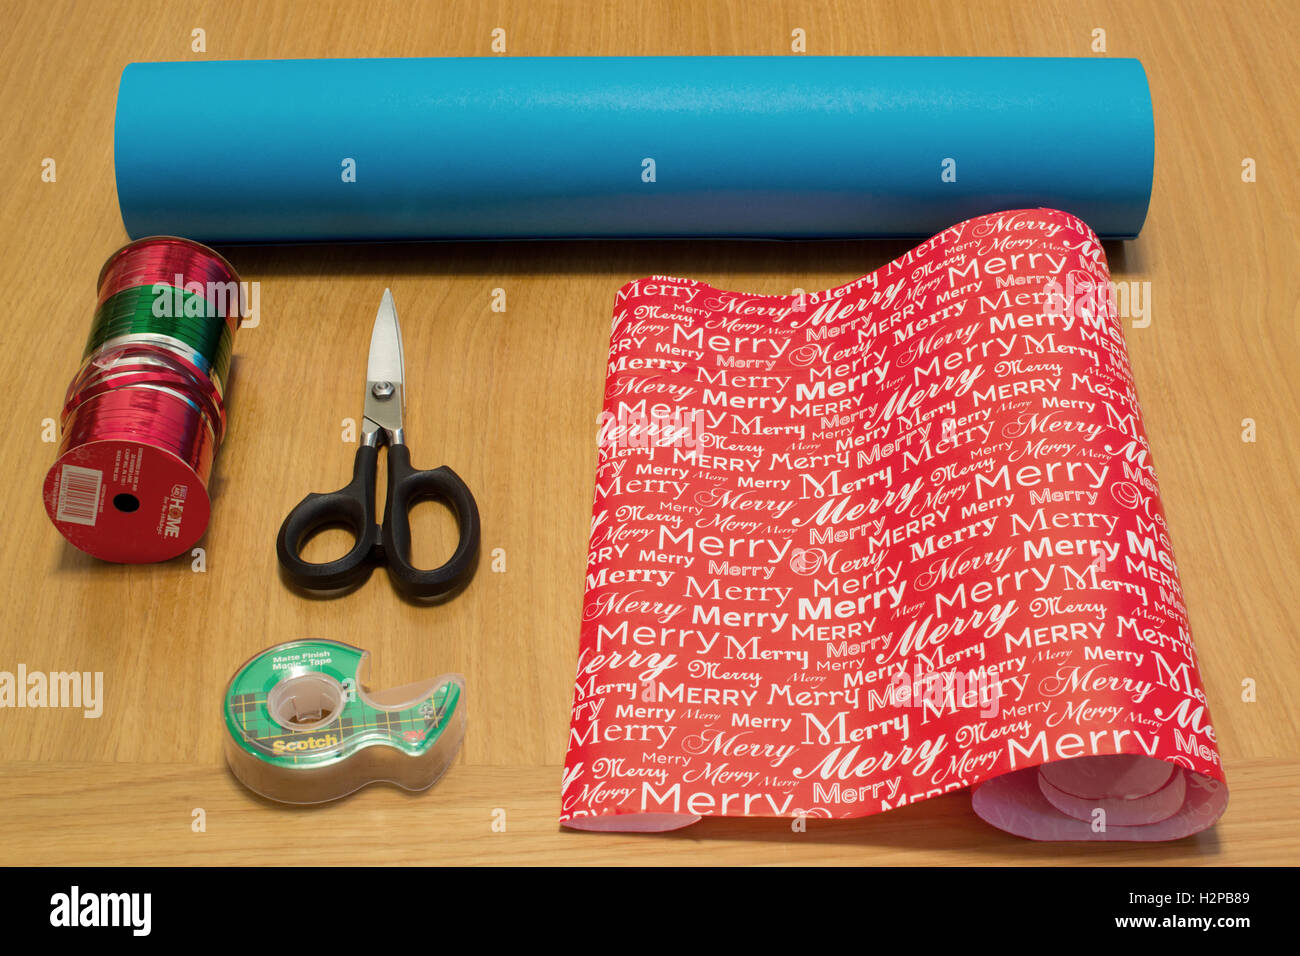 Getting organized: Paper wrap with Christmas theme, scotch tape, scissors  and ribbons for present wrapping, viewed from above Stock Photo - Alamy